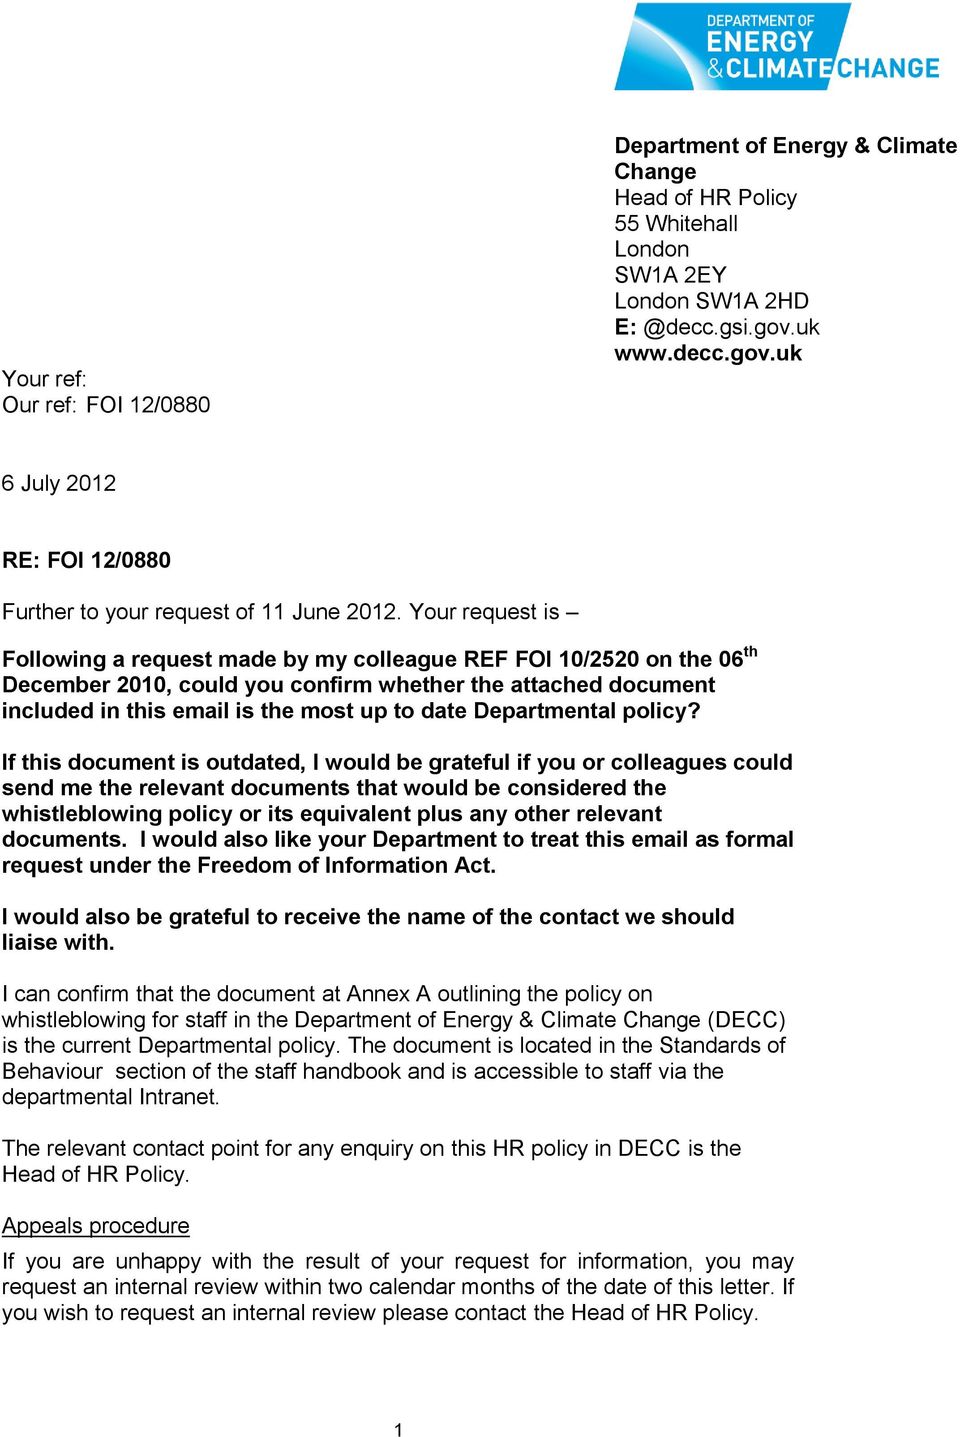 Your request is Following a request made by my colleague REF FOI 10/2520 on the 06 th December 2010, could you confirm whether the attached document included in this email is the most up to date